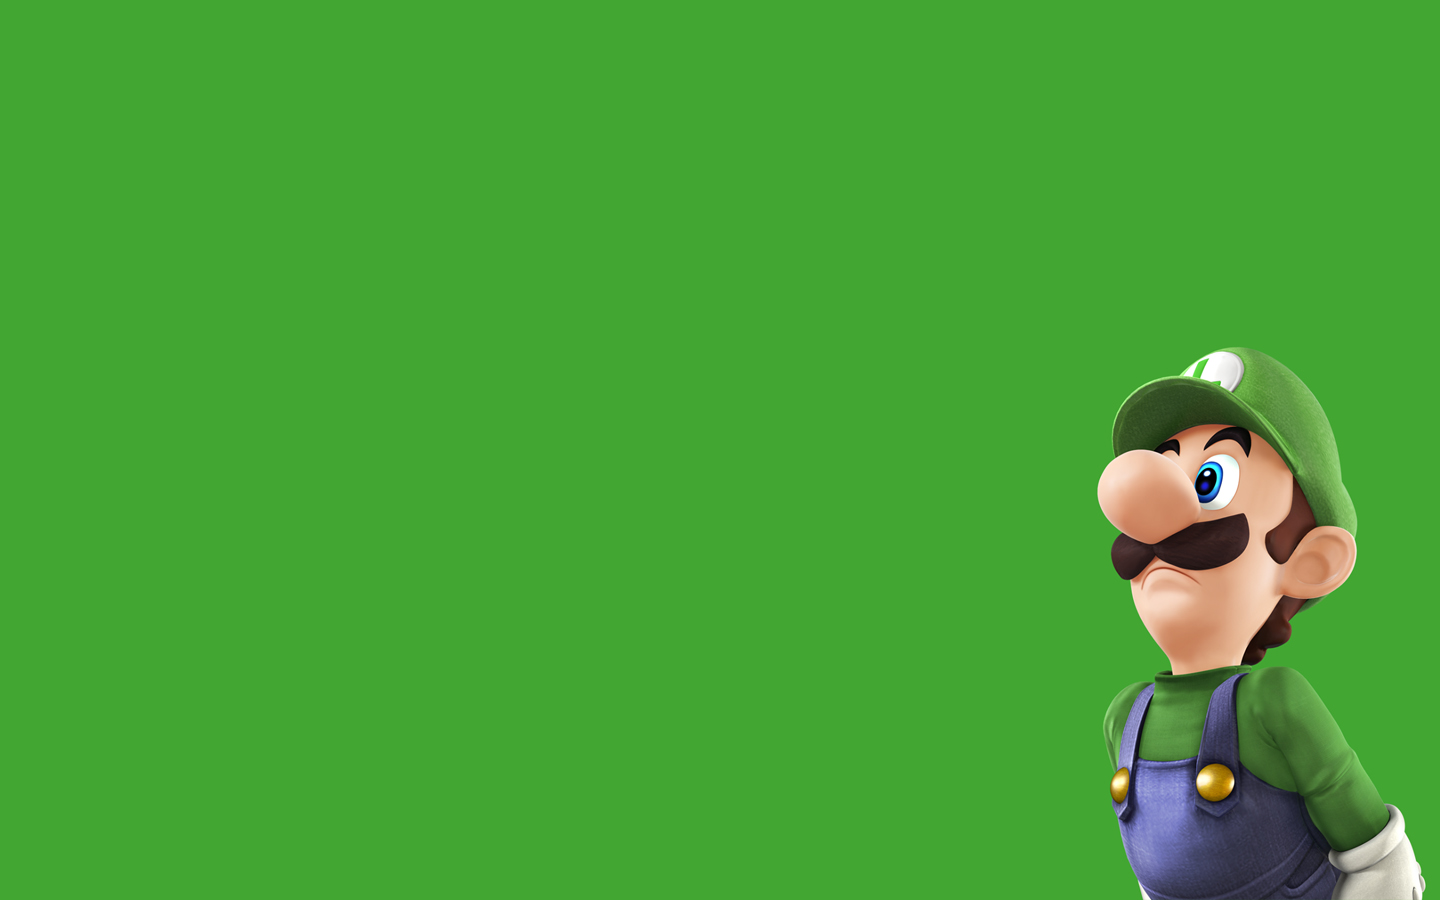 Ssb4made This Wallpaper Of Luigi From The Image Posted - Luigi Super Smash Bros , HD Wallpaper & Backgrounds